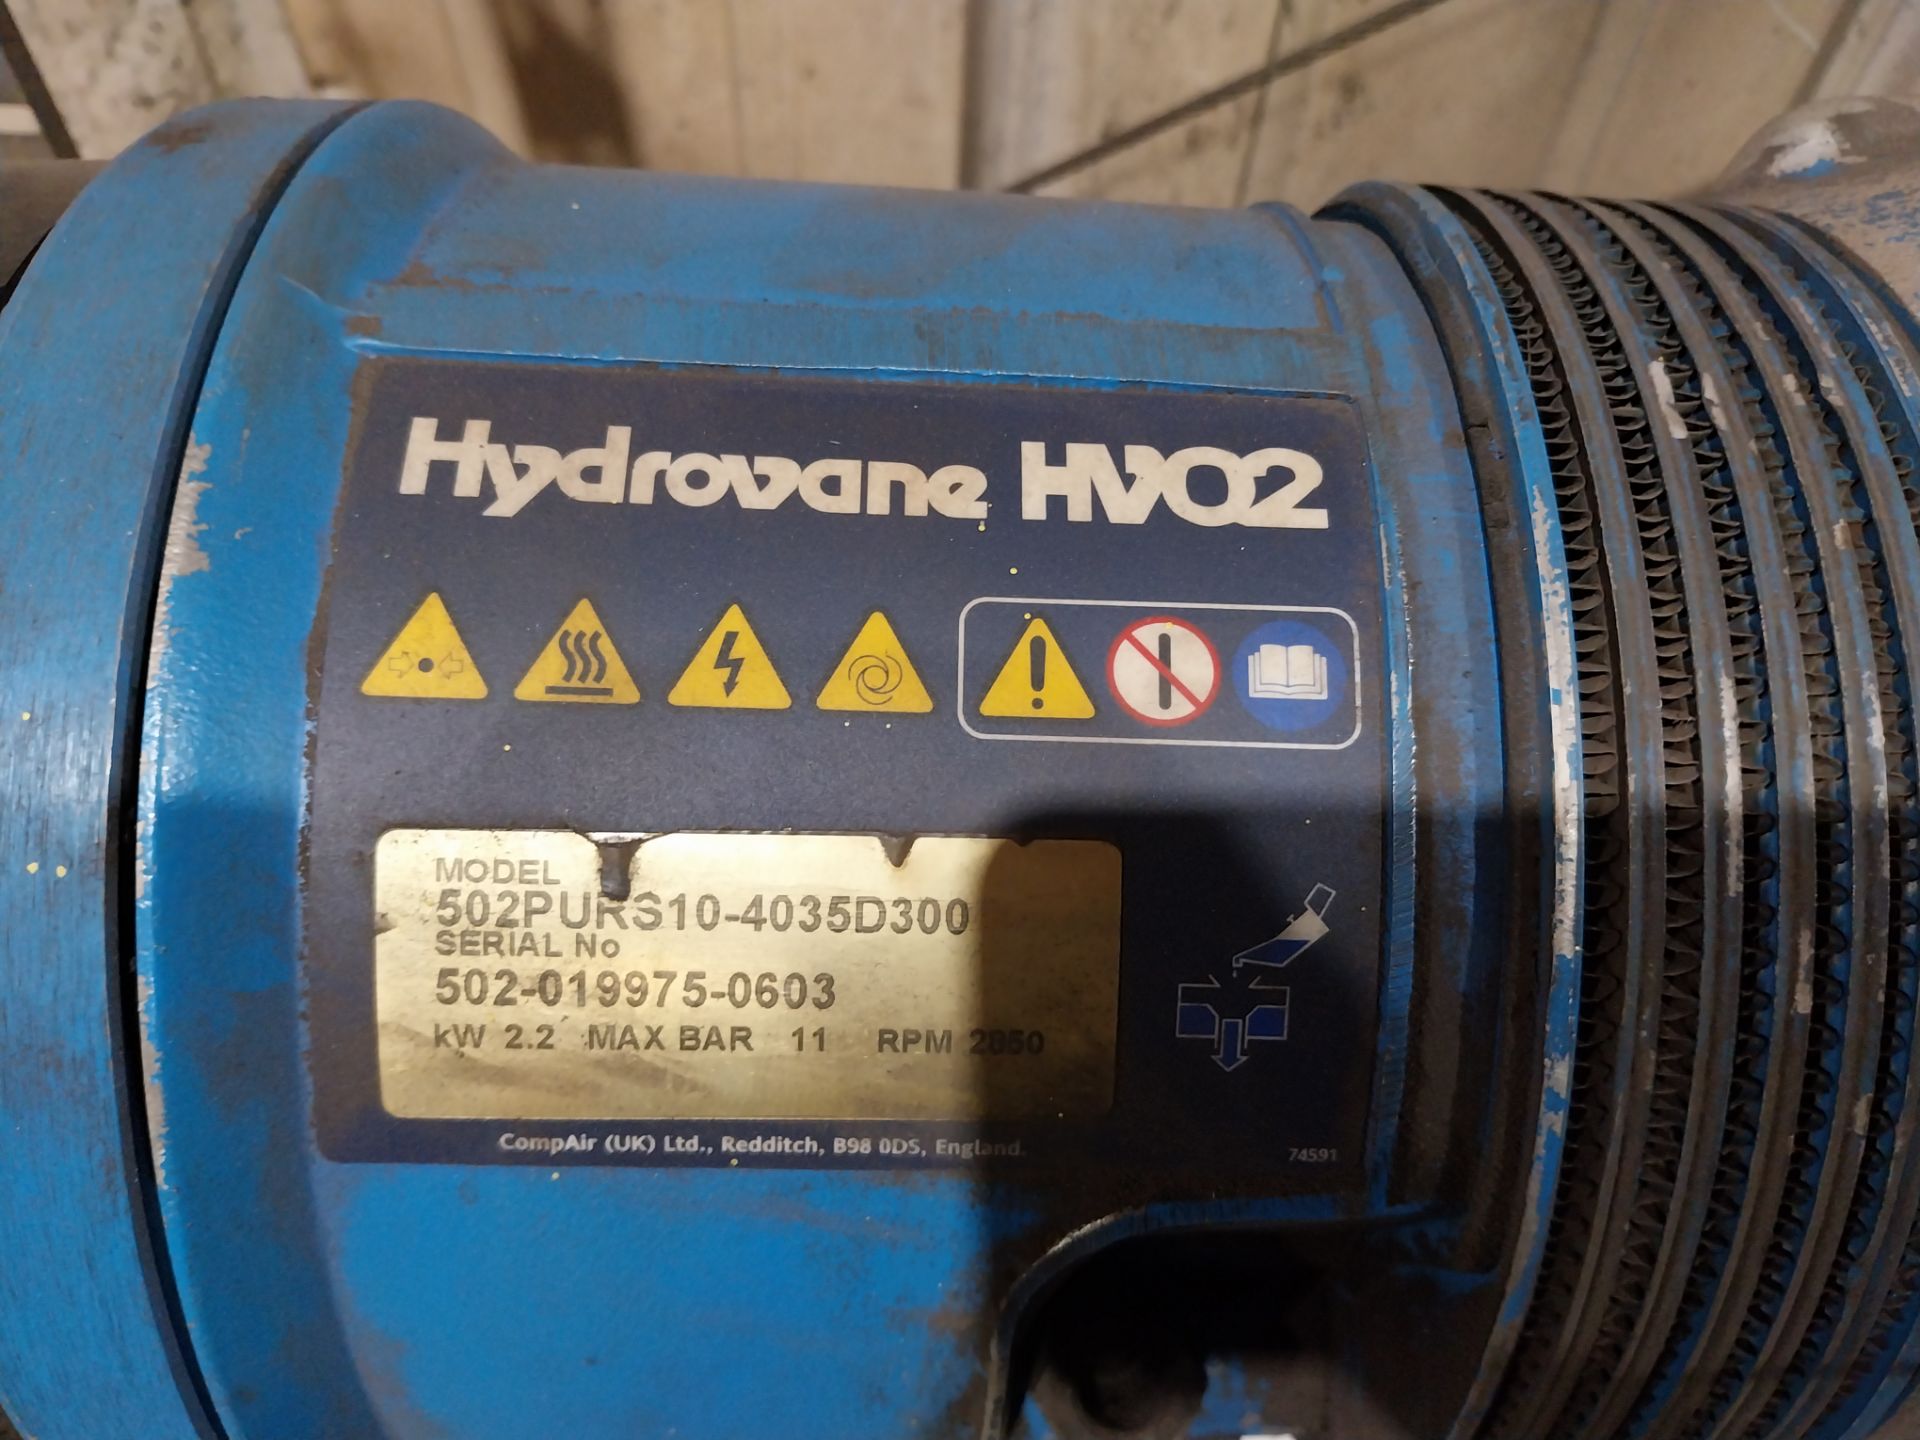 Hydrovane HV02 502PUR510-4035D300 receiver mounted compressor, 2.2kw, max bar 11, RPM 2850, 75 - Image 2 of 5